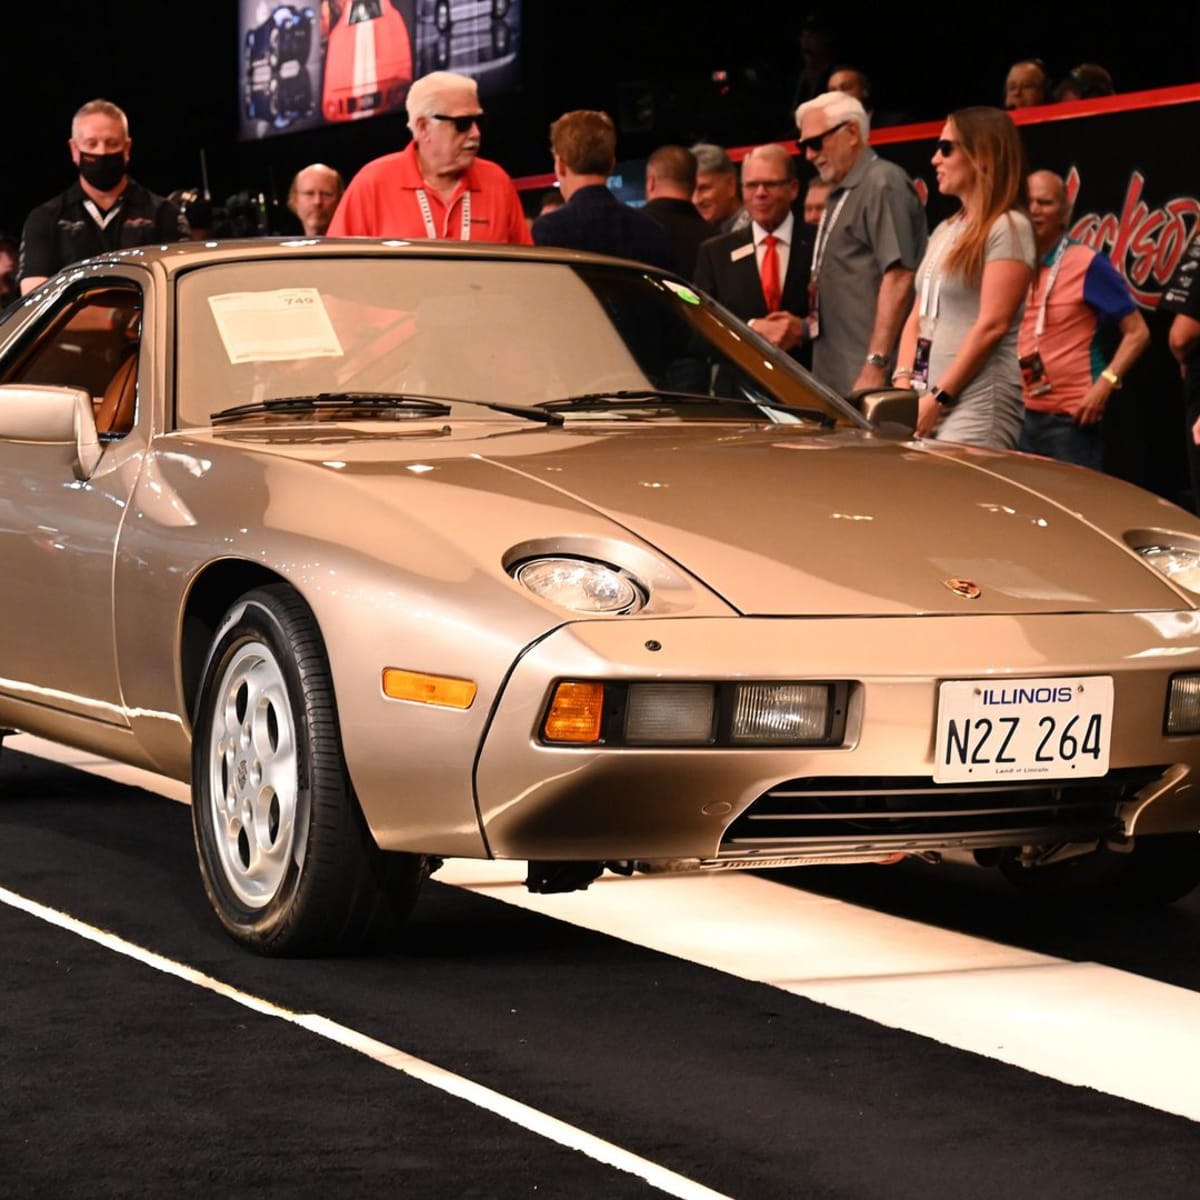 Barrett-Jacksons Inaugural Houston auction highlighted by $1.98 million sale of Porsche 928 Driven by Tom Cruise in Risky Business